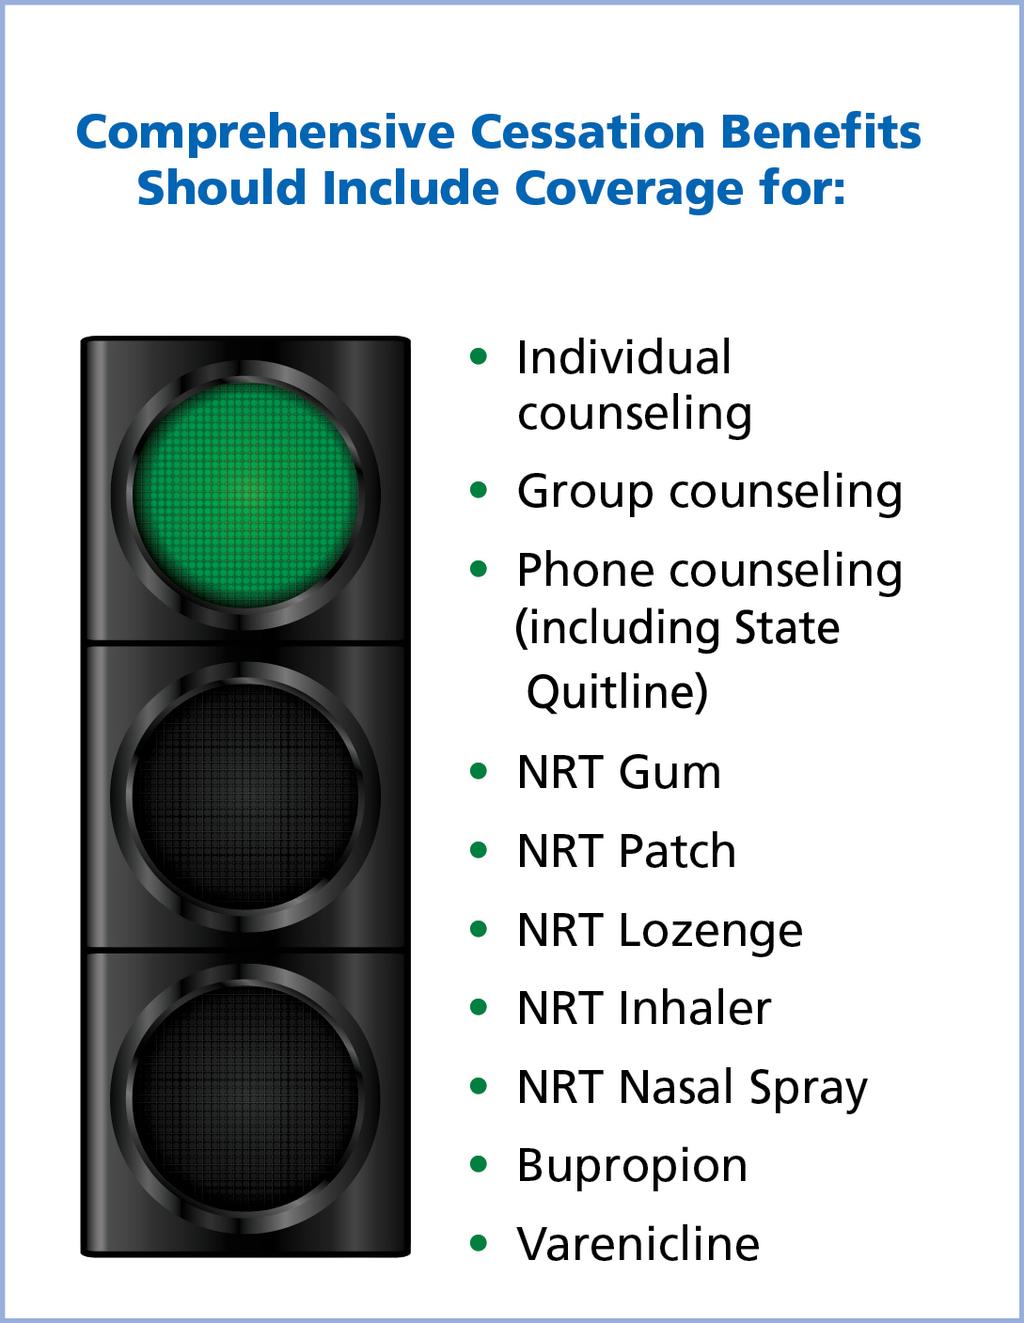 Tobacco Cessation Insurance Coverage Why is Insurance Coverage of Tobacco Cessation Important? Tobacco use is the leading cause of preventable death in the U.S.